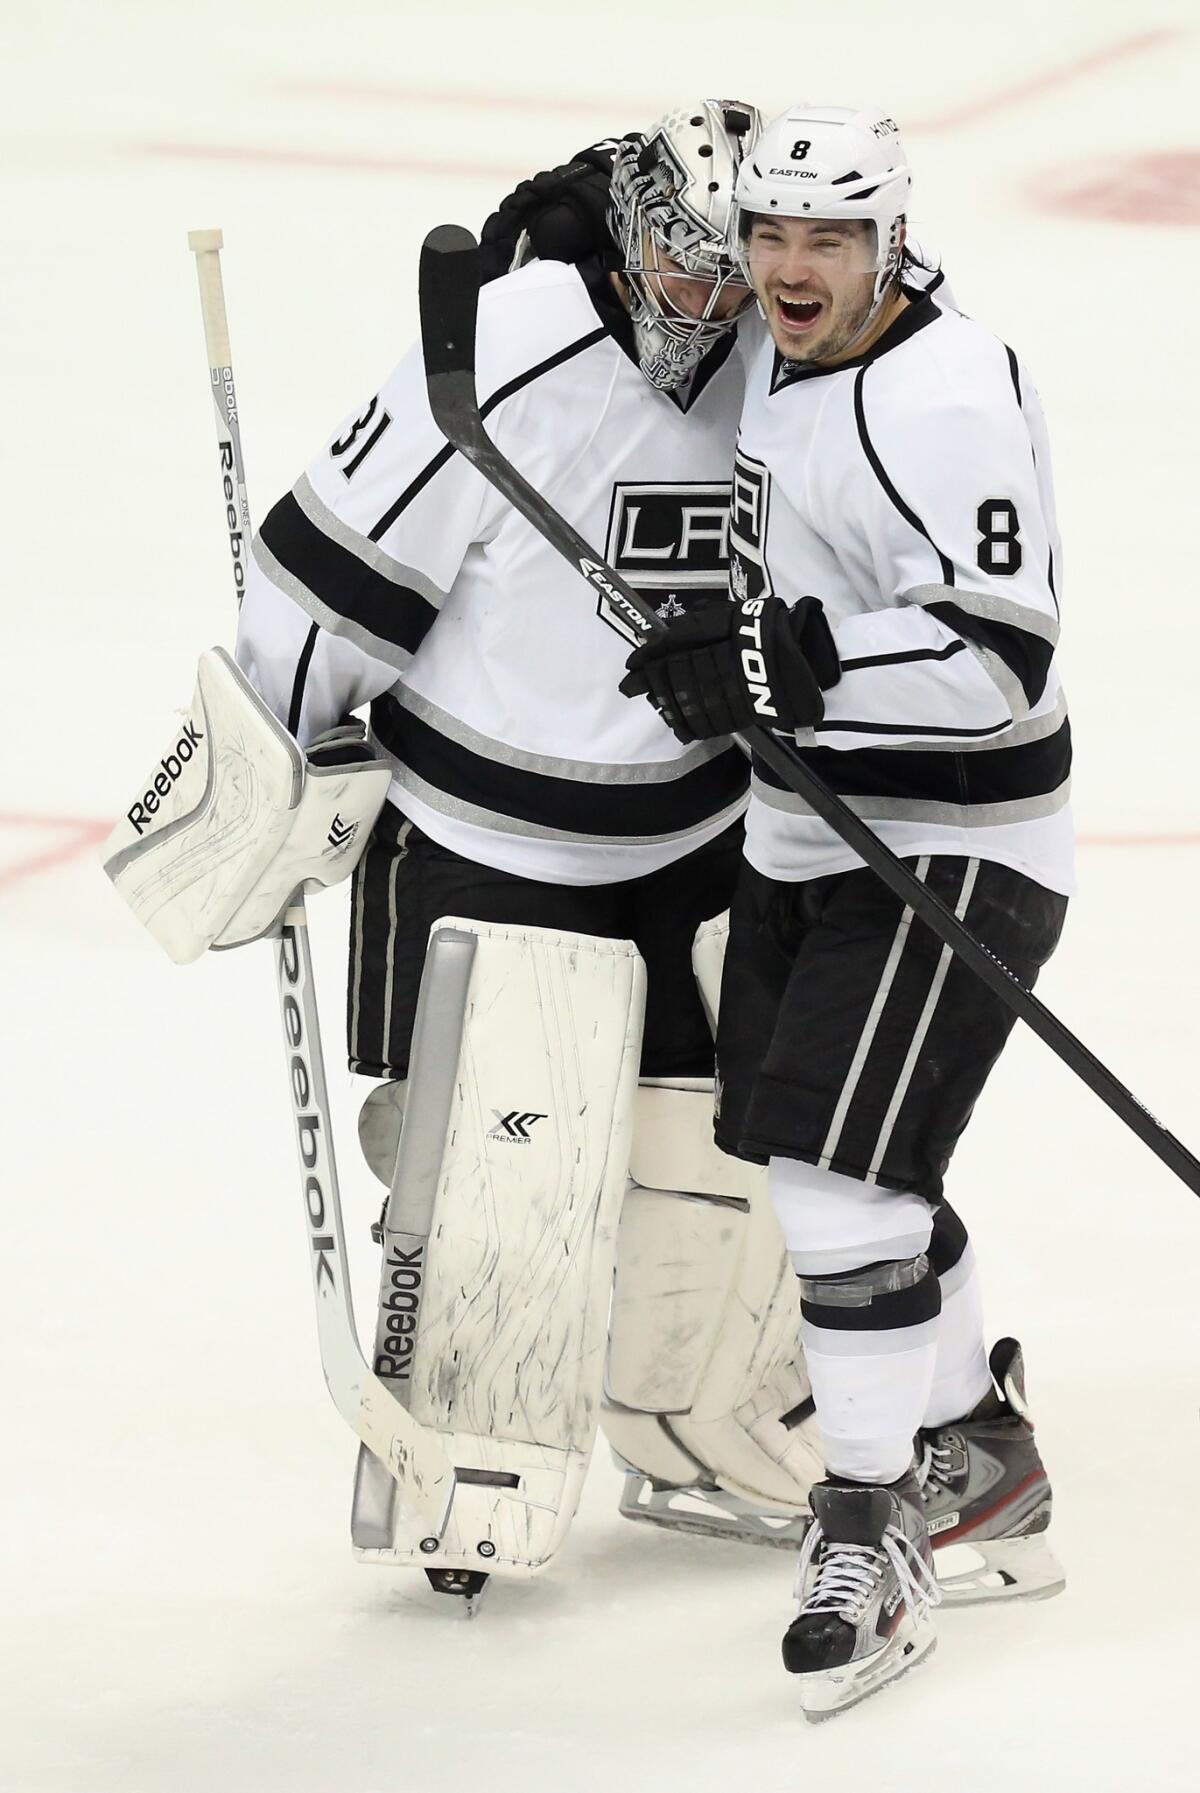 Kings goalie Martin Jones is congratulated by teammate Drew Doughty following the Kings' 3-2 shootout win over the Ducks on Tuesday.